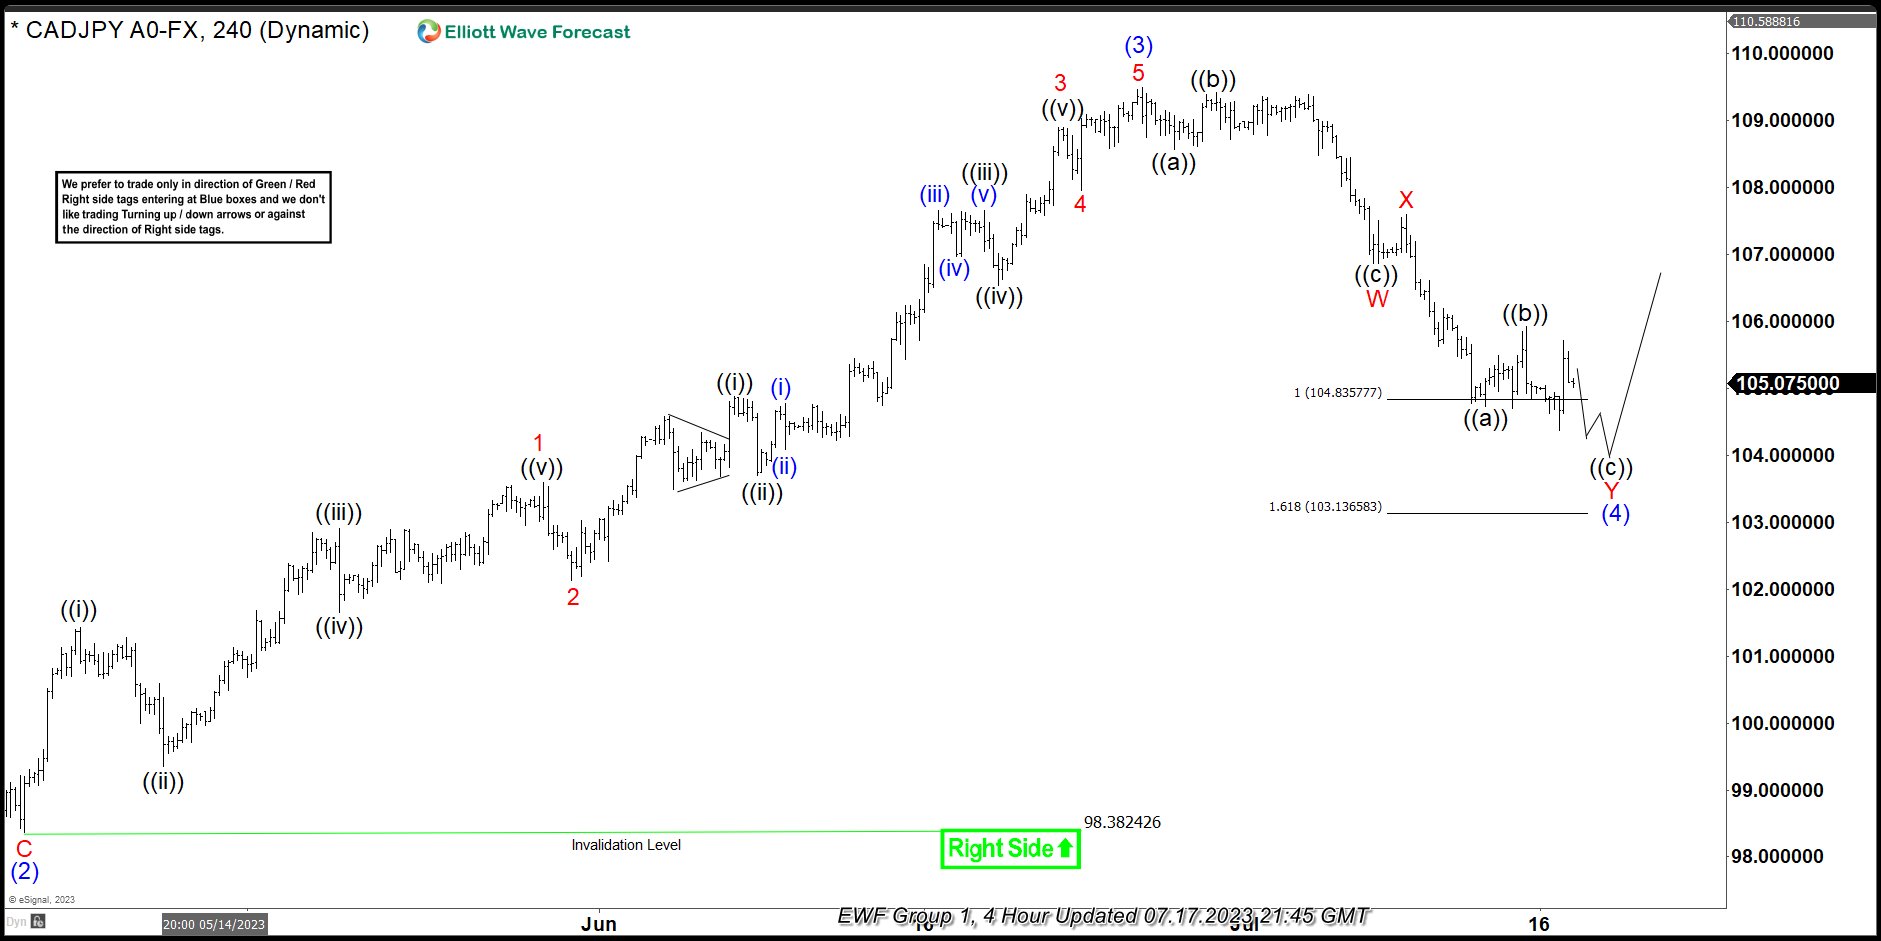 CADJPY Calling The Rally After Elliott Wave Double Three